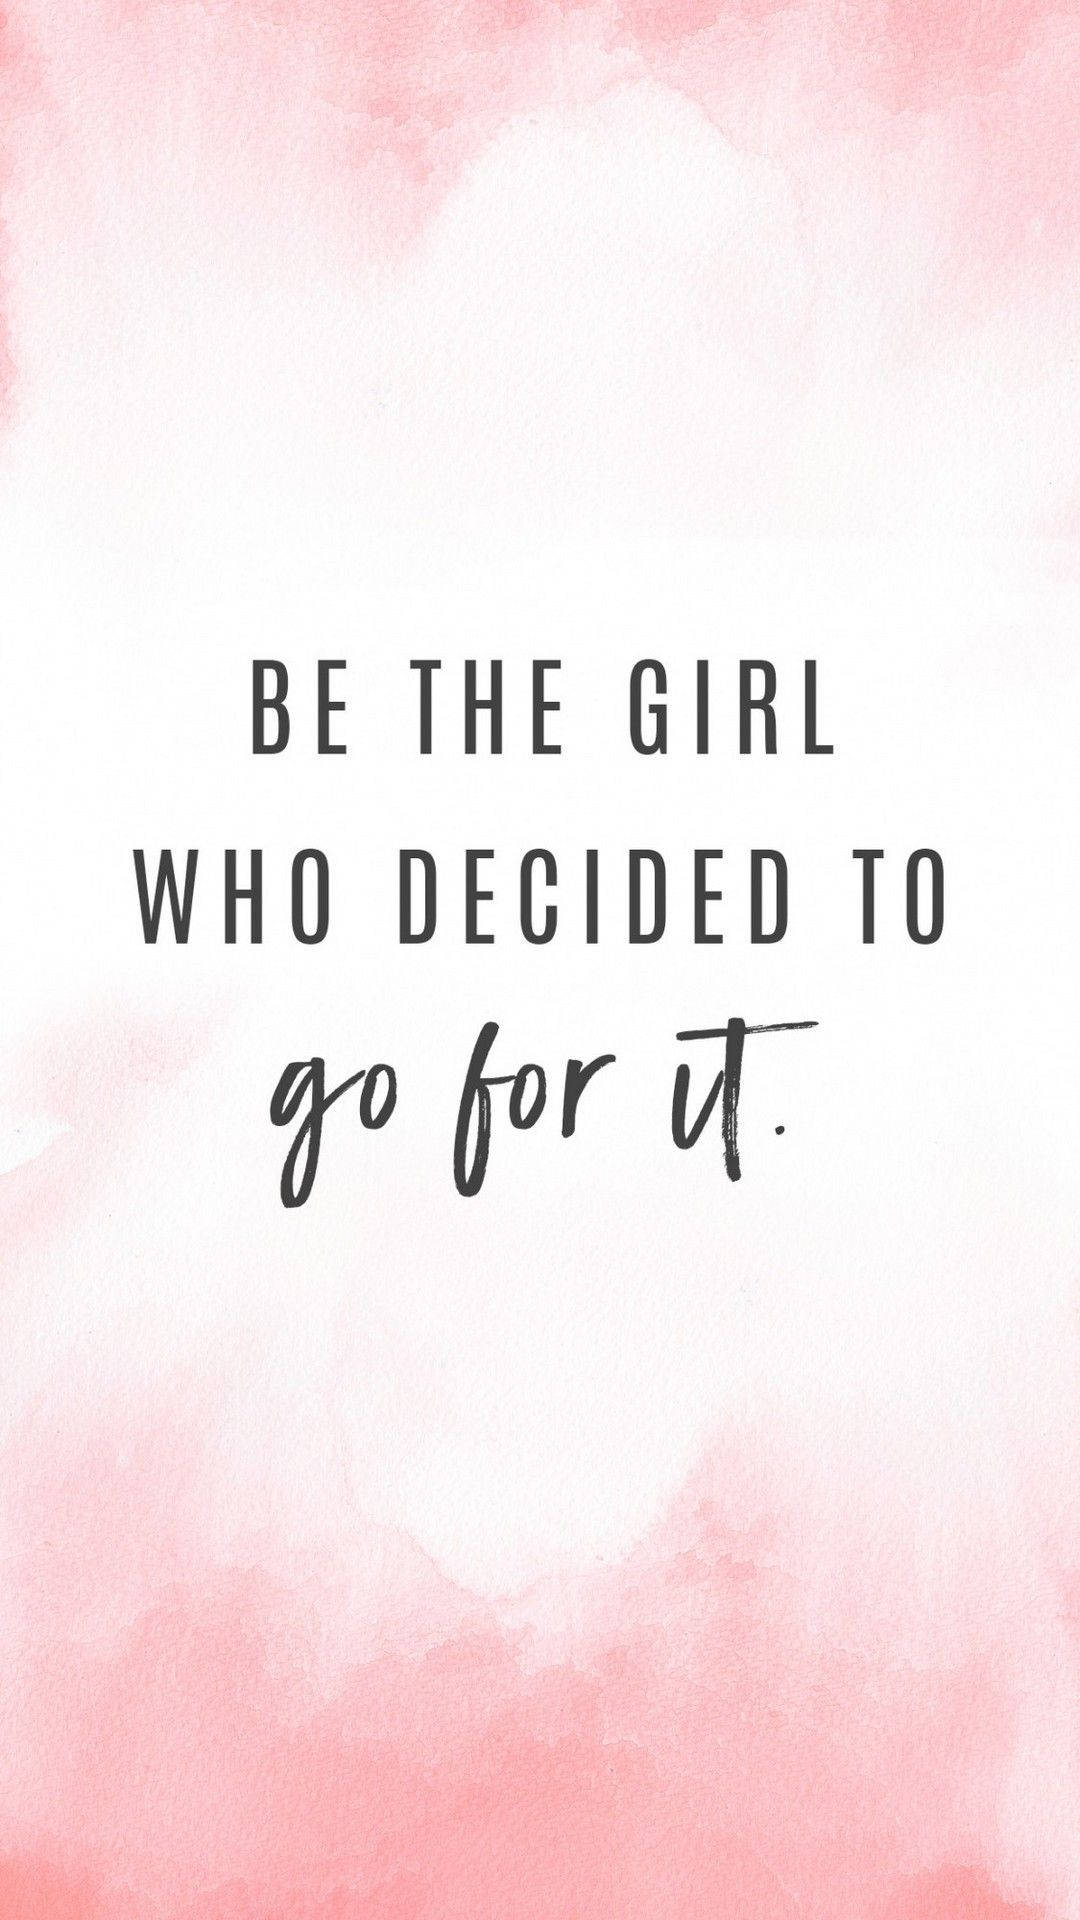 Girly Motivational Go For It Quote Wallpaper